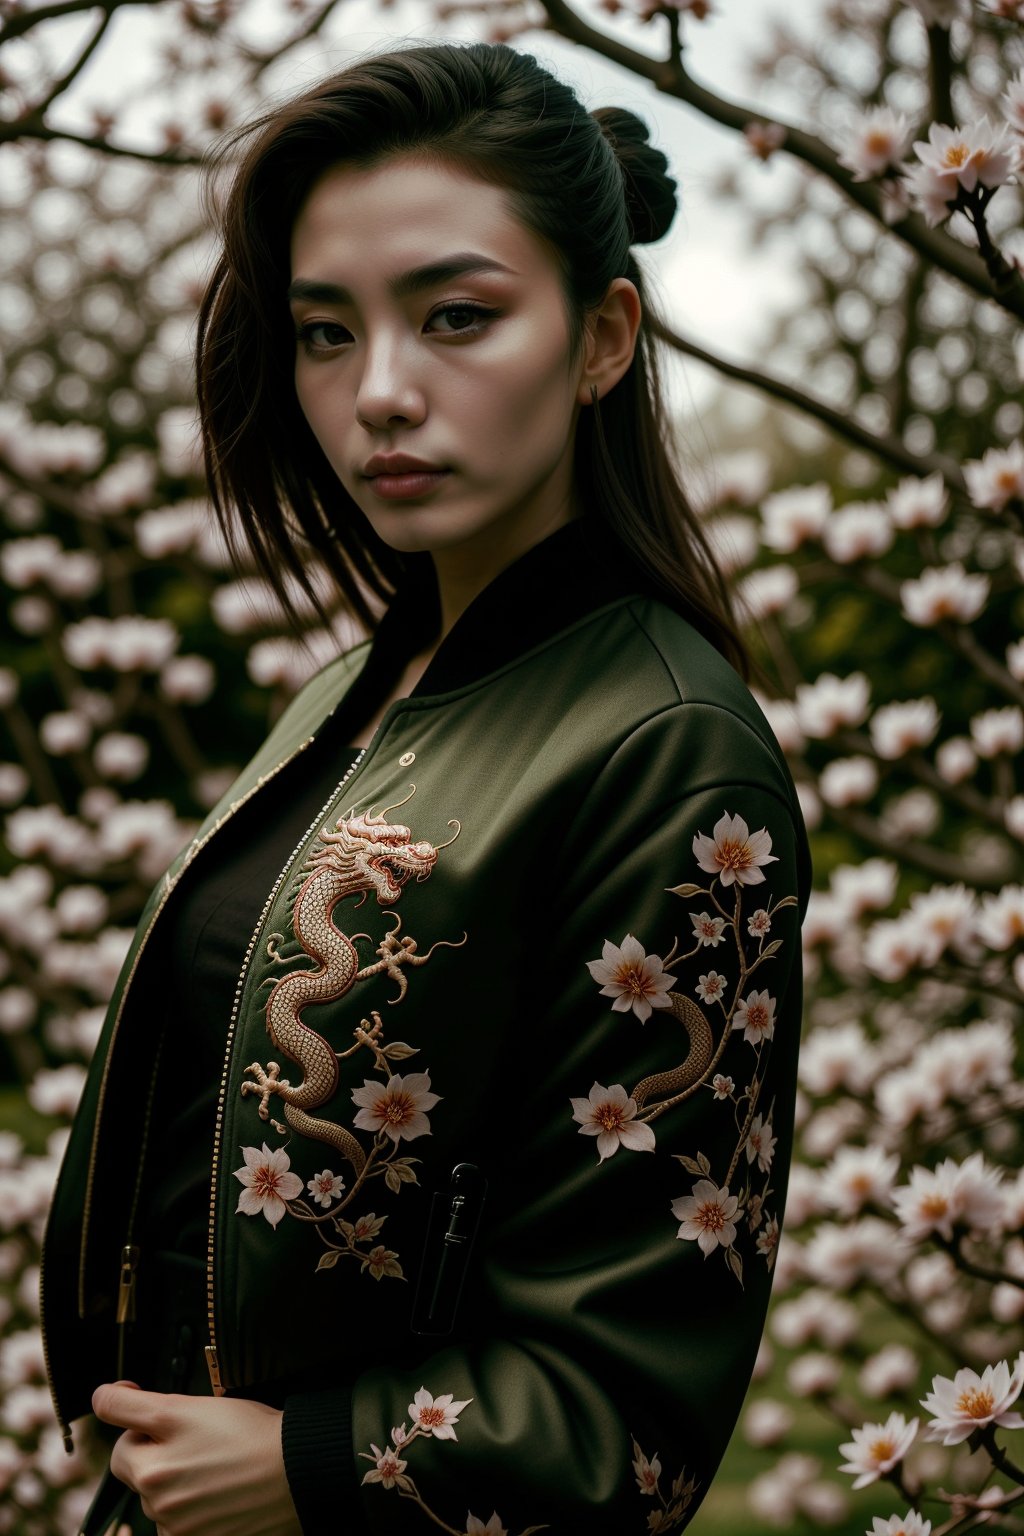 wo_dragonjacket01, (facing the camera), (a gorgeous asian woman from yakuza, in the park, blossom trees:1.2), wearing a green jacket with a black dragon design, 8k, masterpiece, award-winning photography, high resolution,<lora:659111690174031528:1.0>